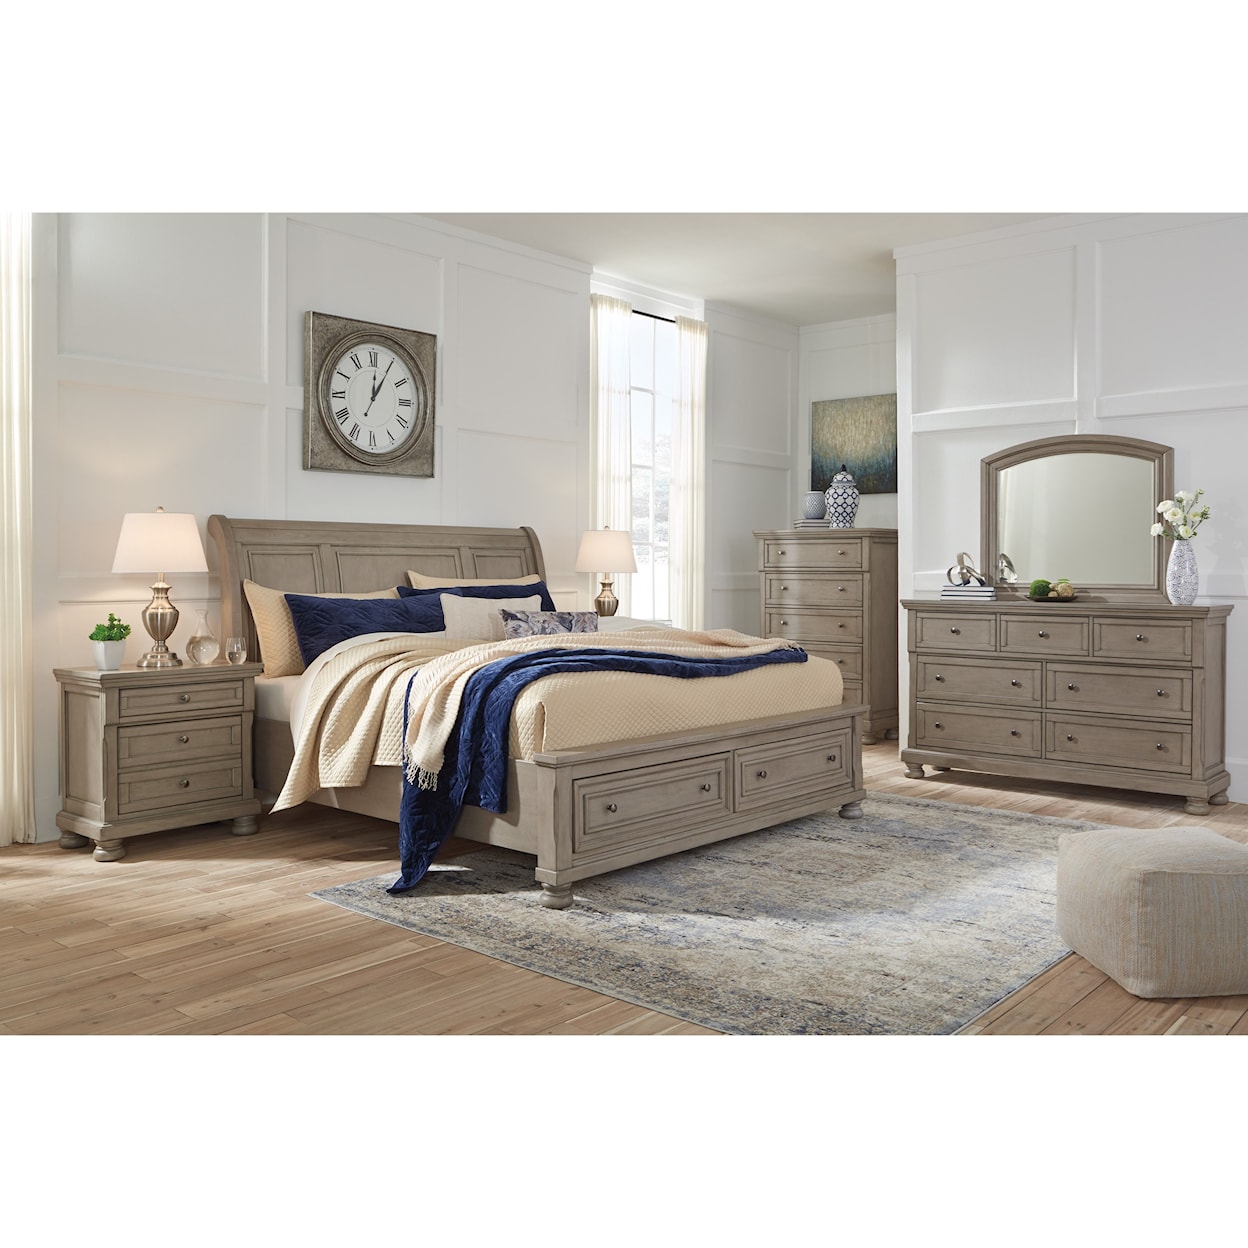 Signature Design by Ashley Lettner California King Bedroom Group